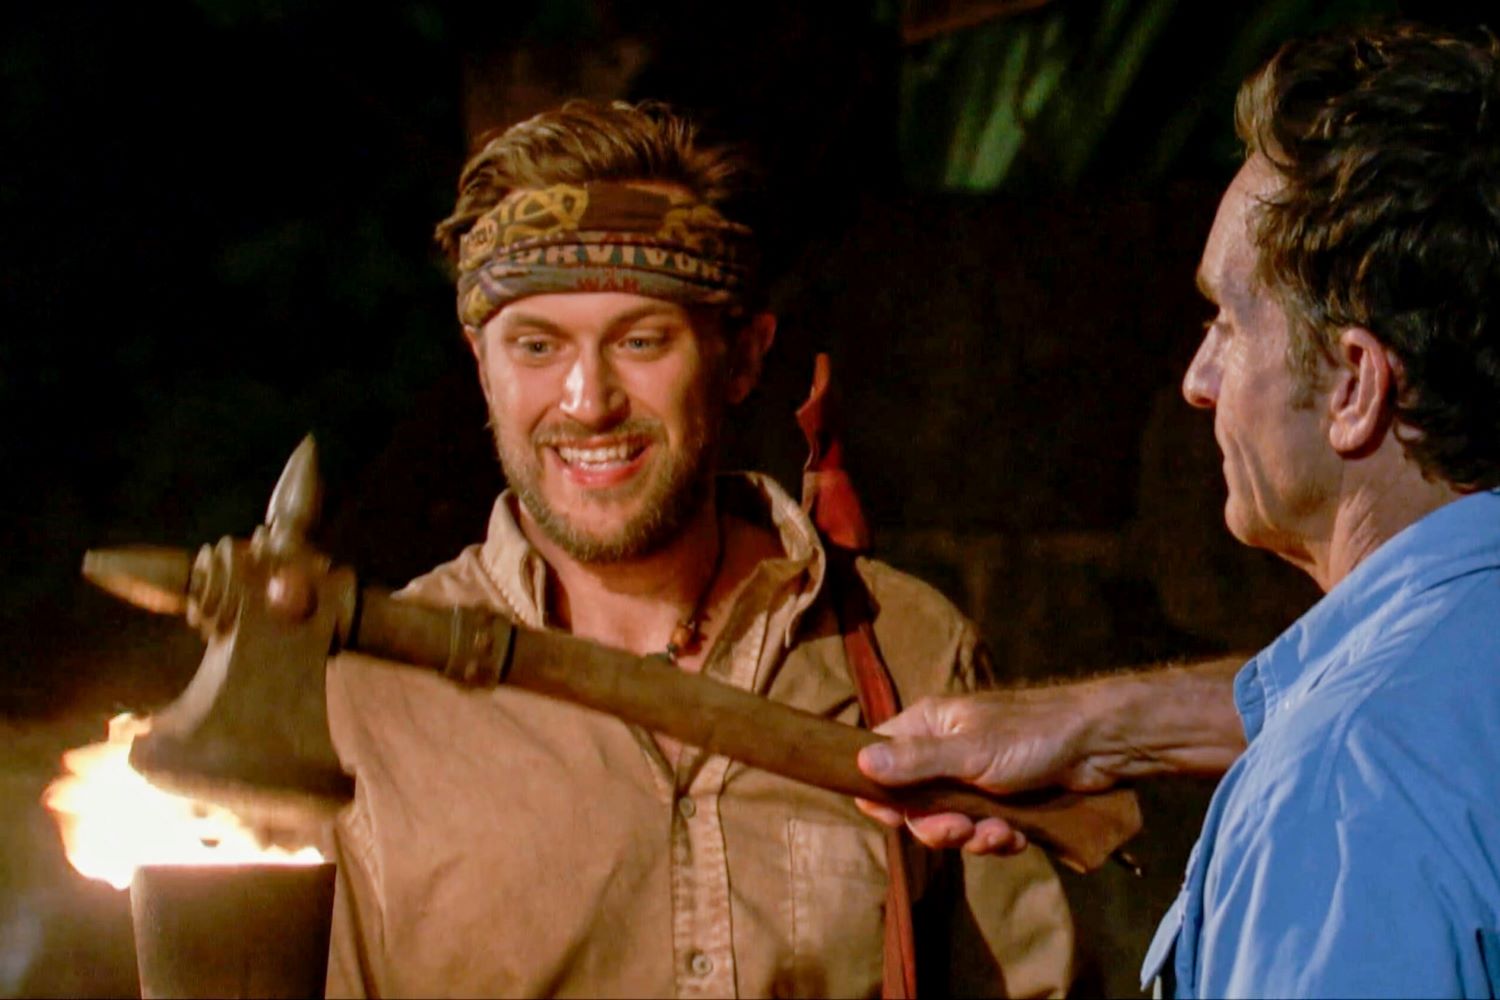 Host Jeff Probst extinguishes Nick Wilson's torch at Tribal Council in 'Survivor: Winners at War' on CBS. Nick wears a tan button-up shirt and his brown 'Survivor' buff around his head. Probst wears a blue button-up shirt.